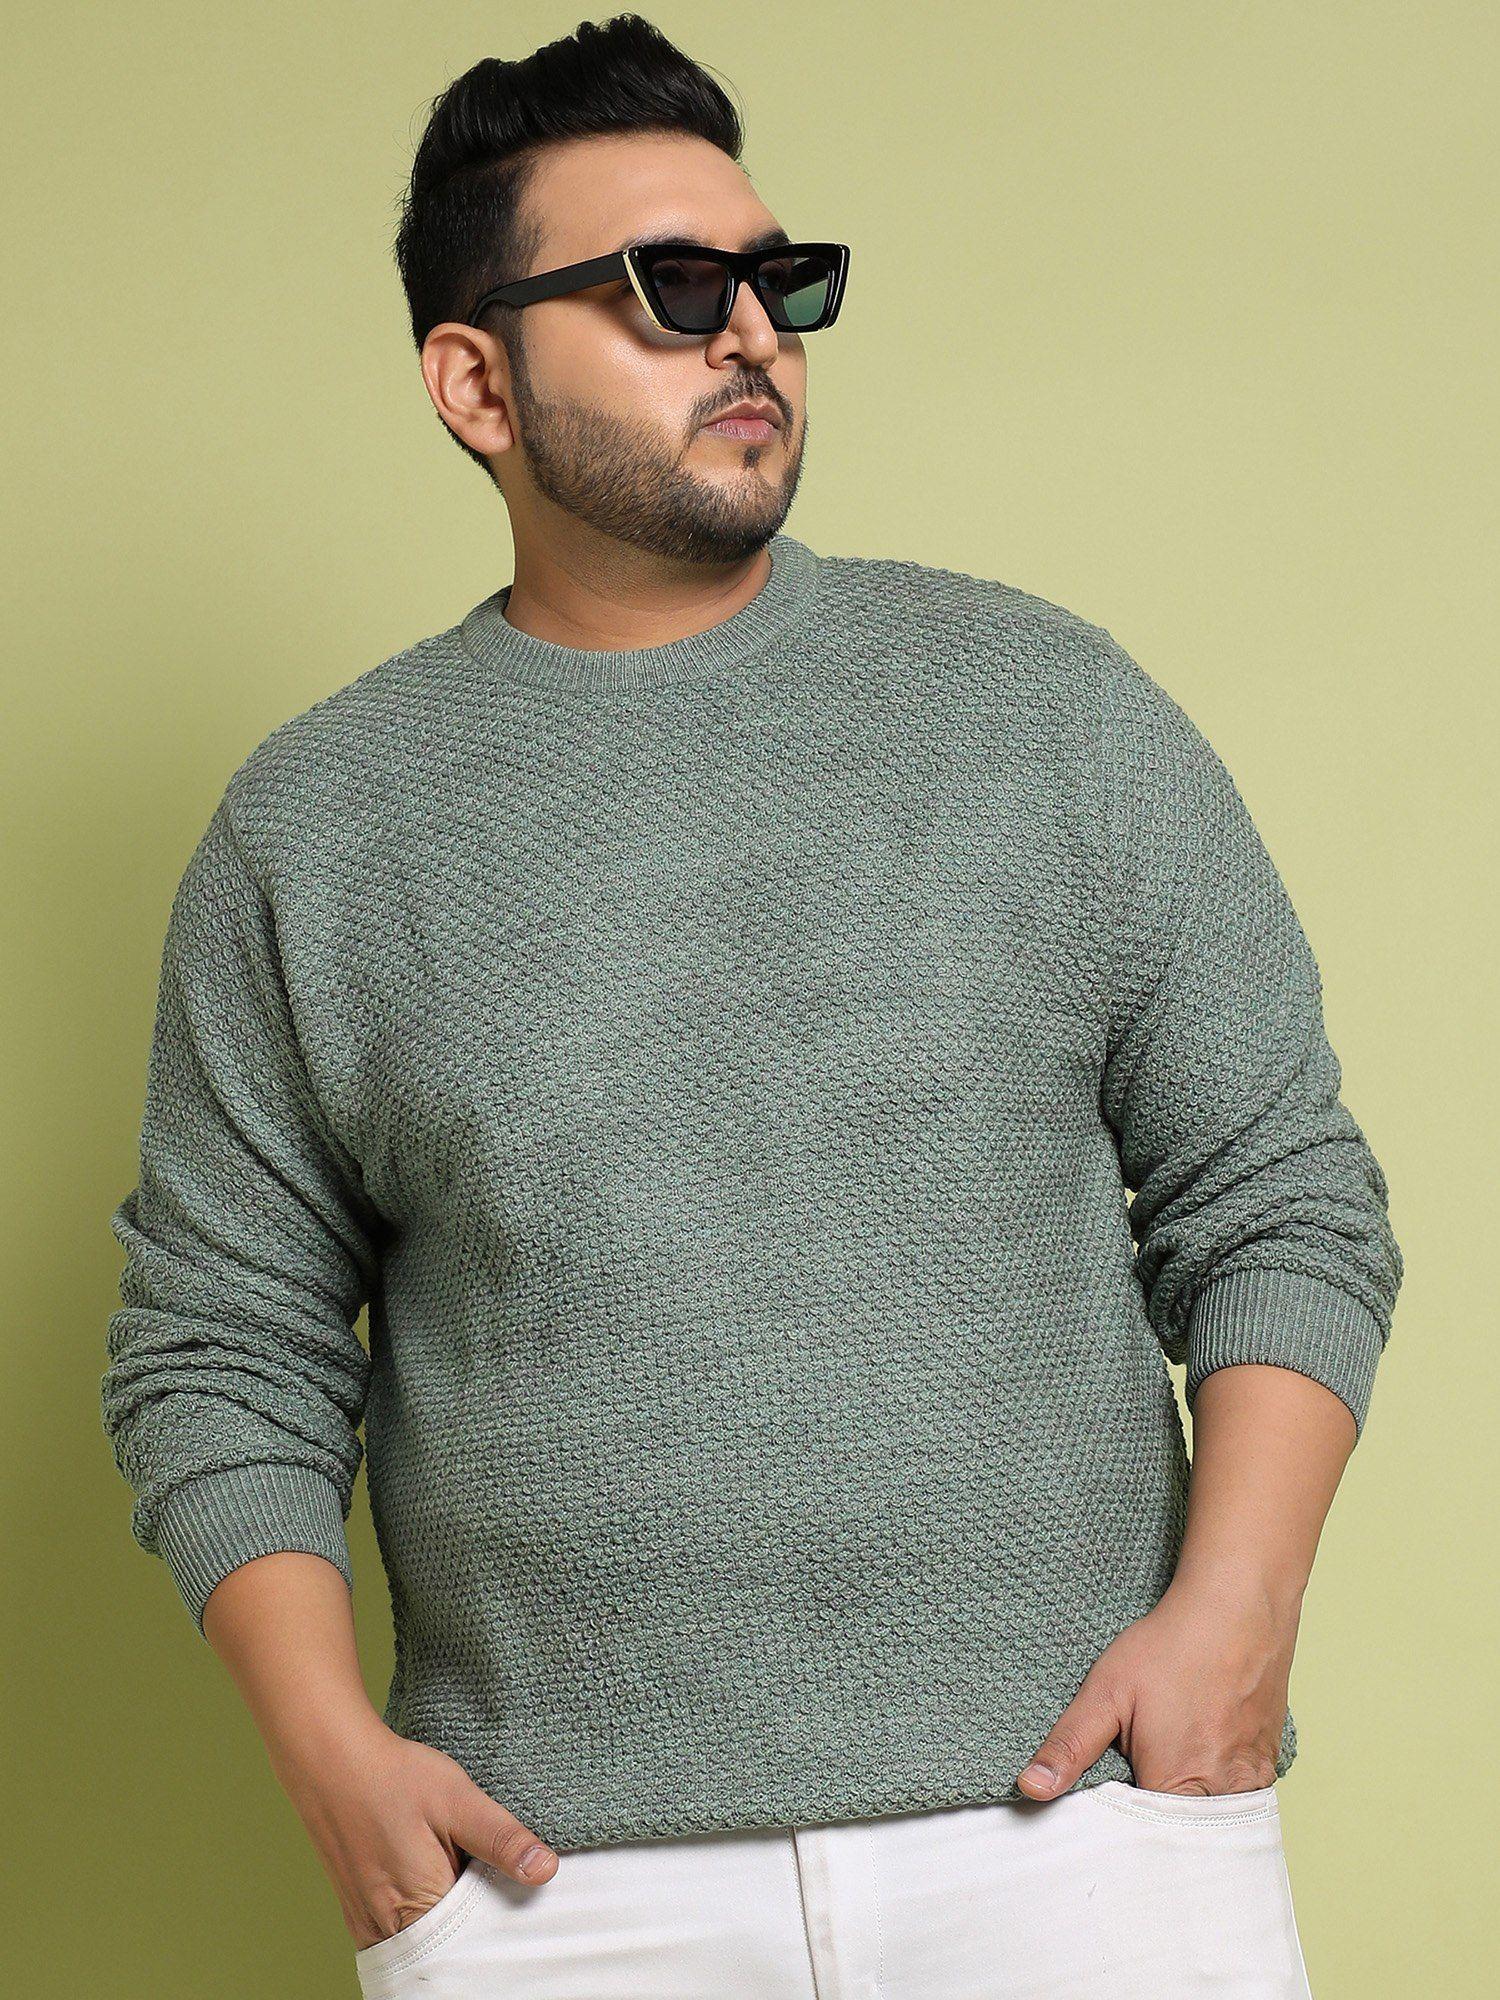 men's olive textured knit pullover sweater